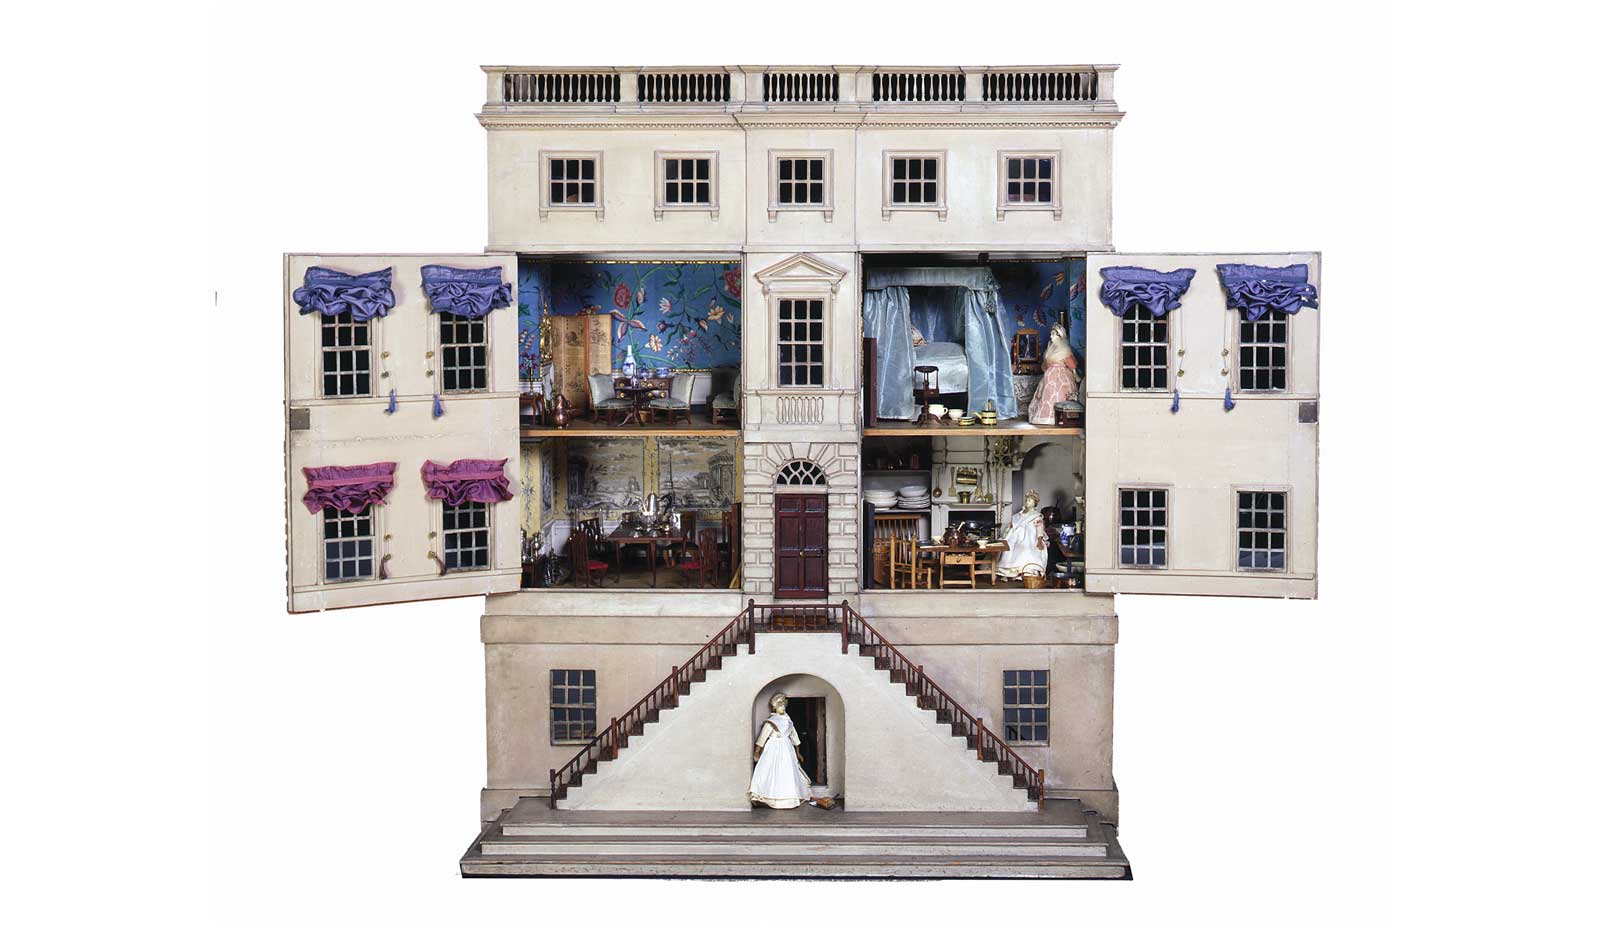 The wallpapers, fabrics and furniture of this dolls’ house show the lifestyle of a wealthy family.